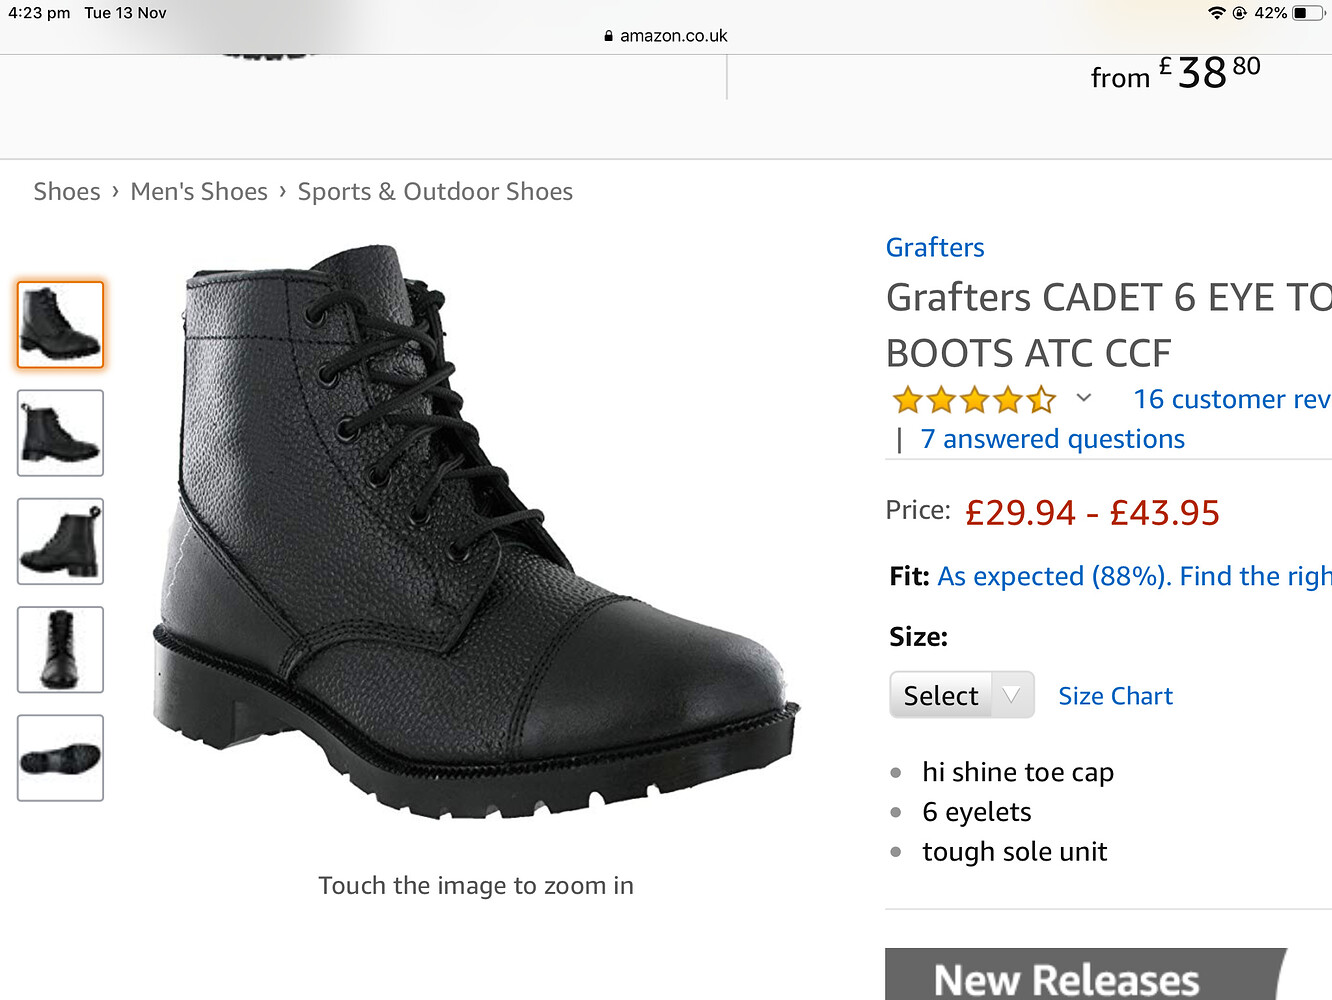 New boots - Ask the Staff - Air Cadet Central